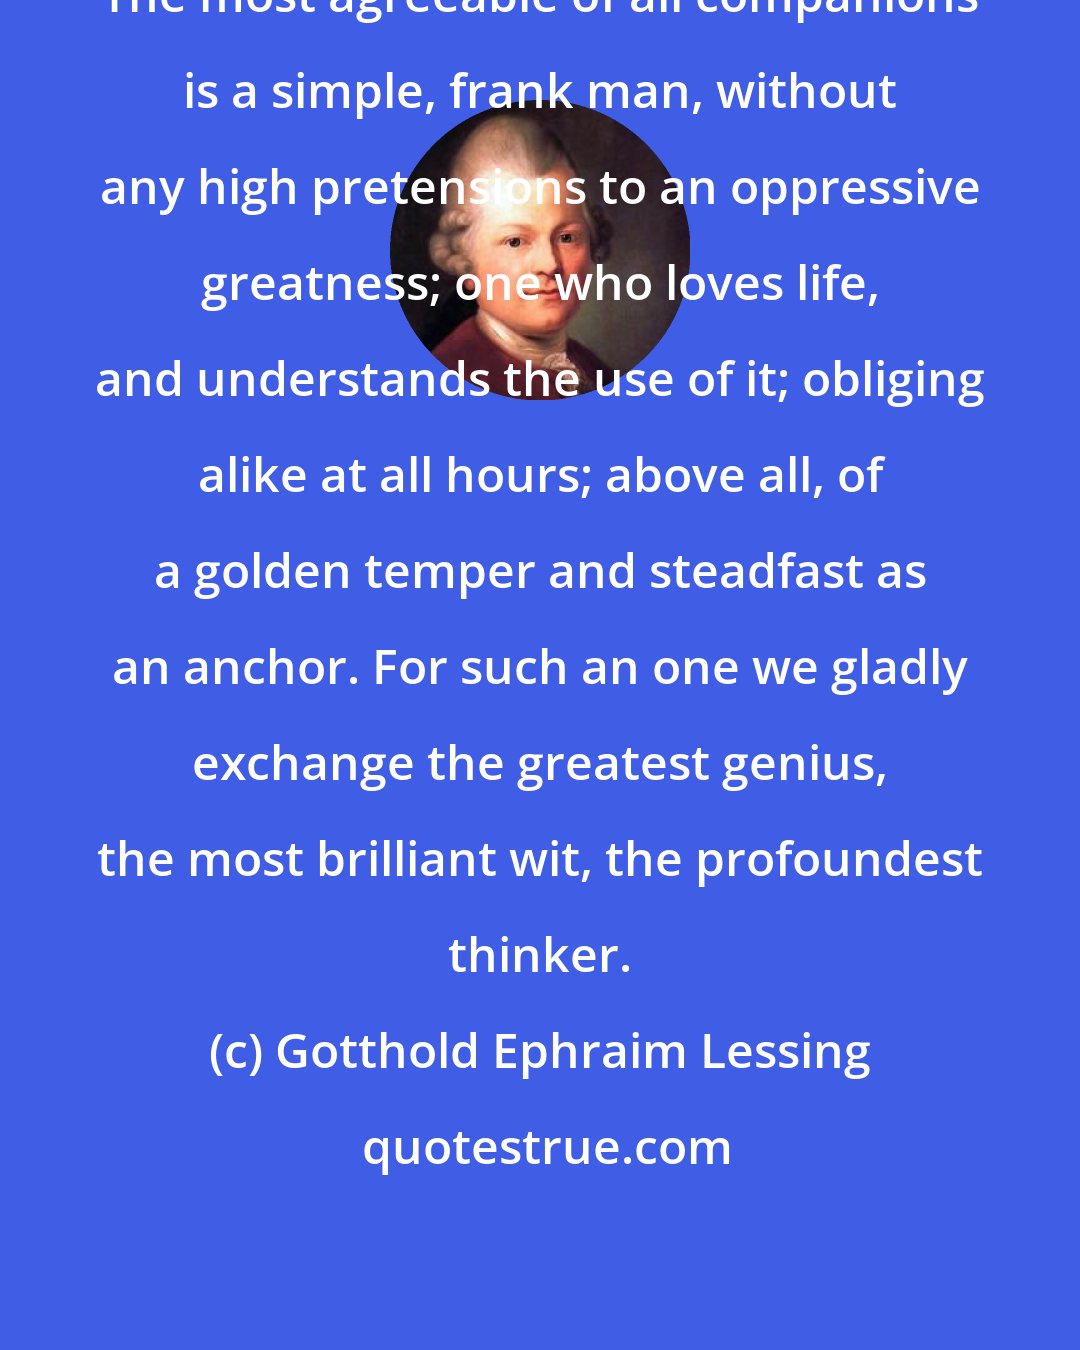 Gotthold Ephraim Lessing: The most agreeable of all companions is a simple, frank man, without any high pretensions to an oppressive greatness; one who loves life, and understands the use of it; obliging alike at all hours; above all, of a golden temper and steadfast as an anchor. For such an one we gladly exchange the greatest genius, the most brilliant wit, the profoundest thinker.